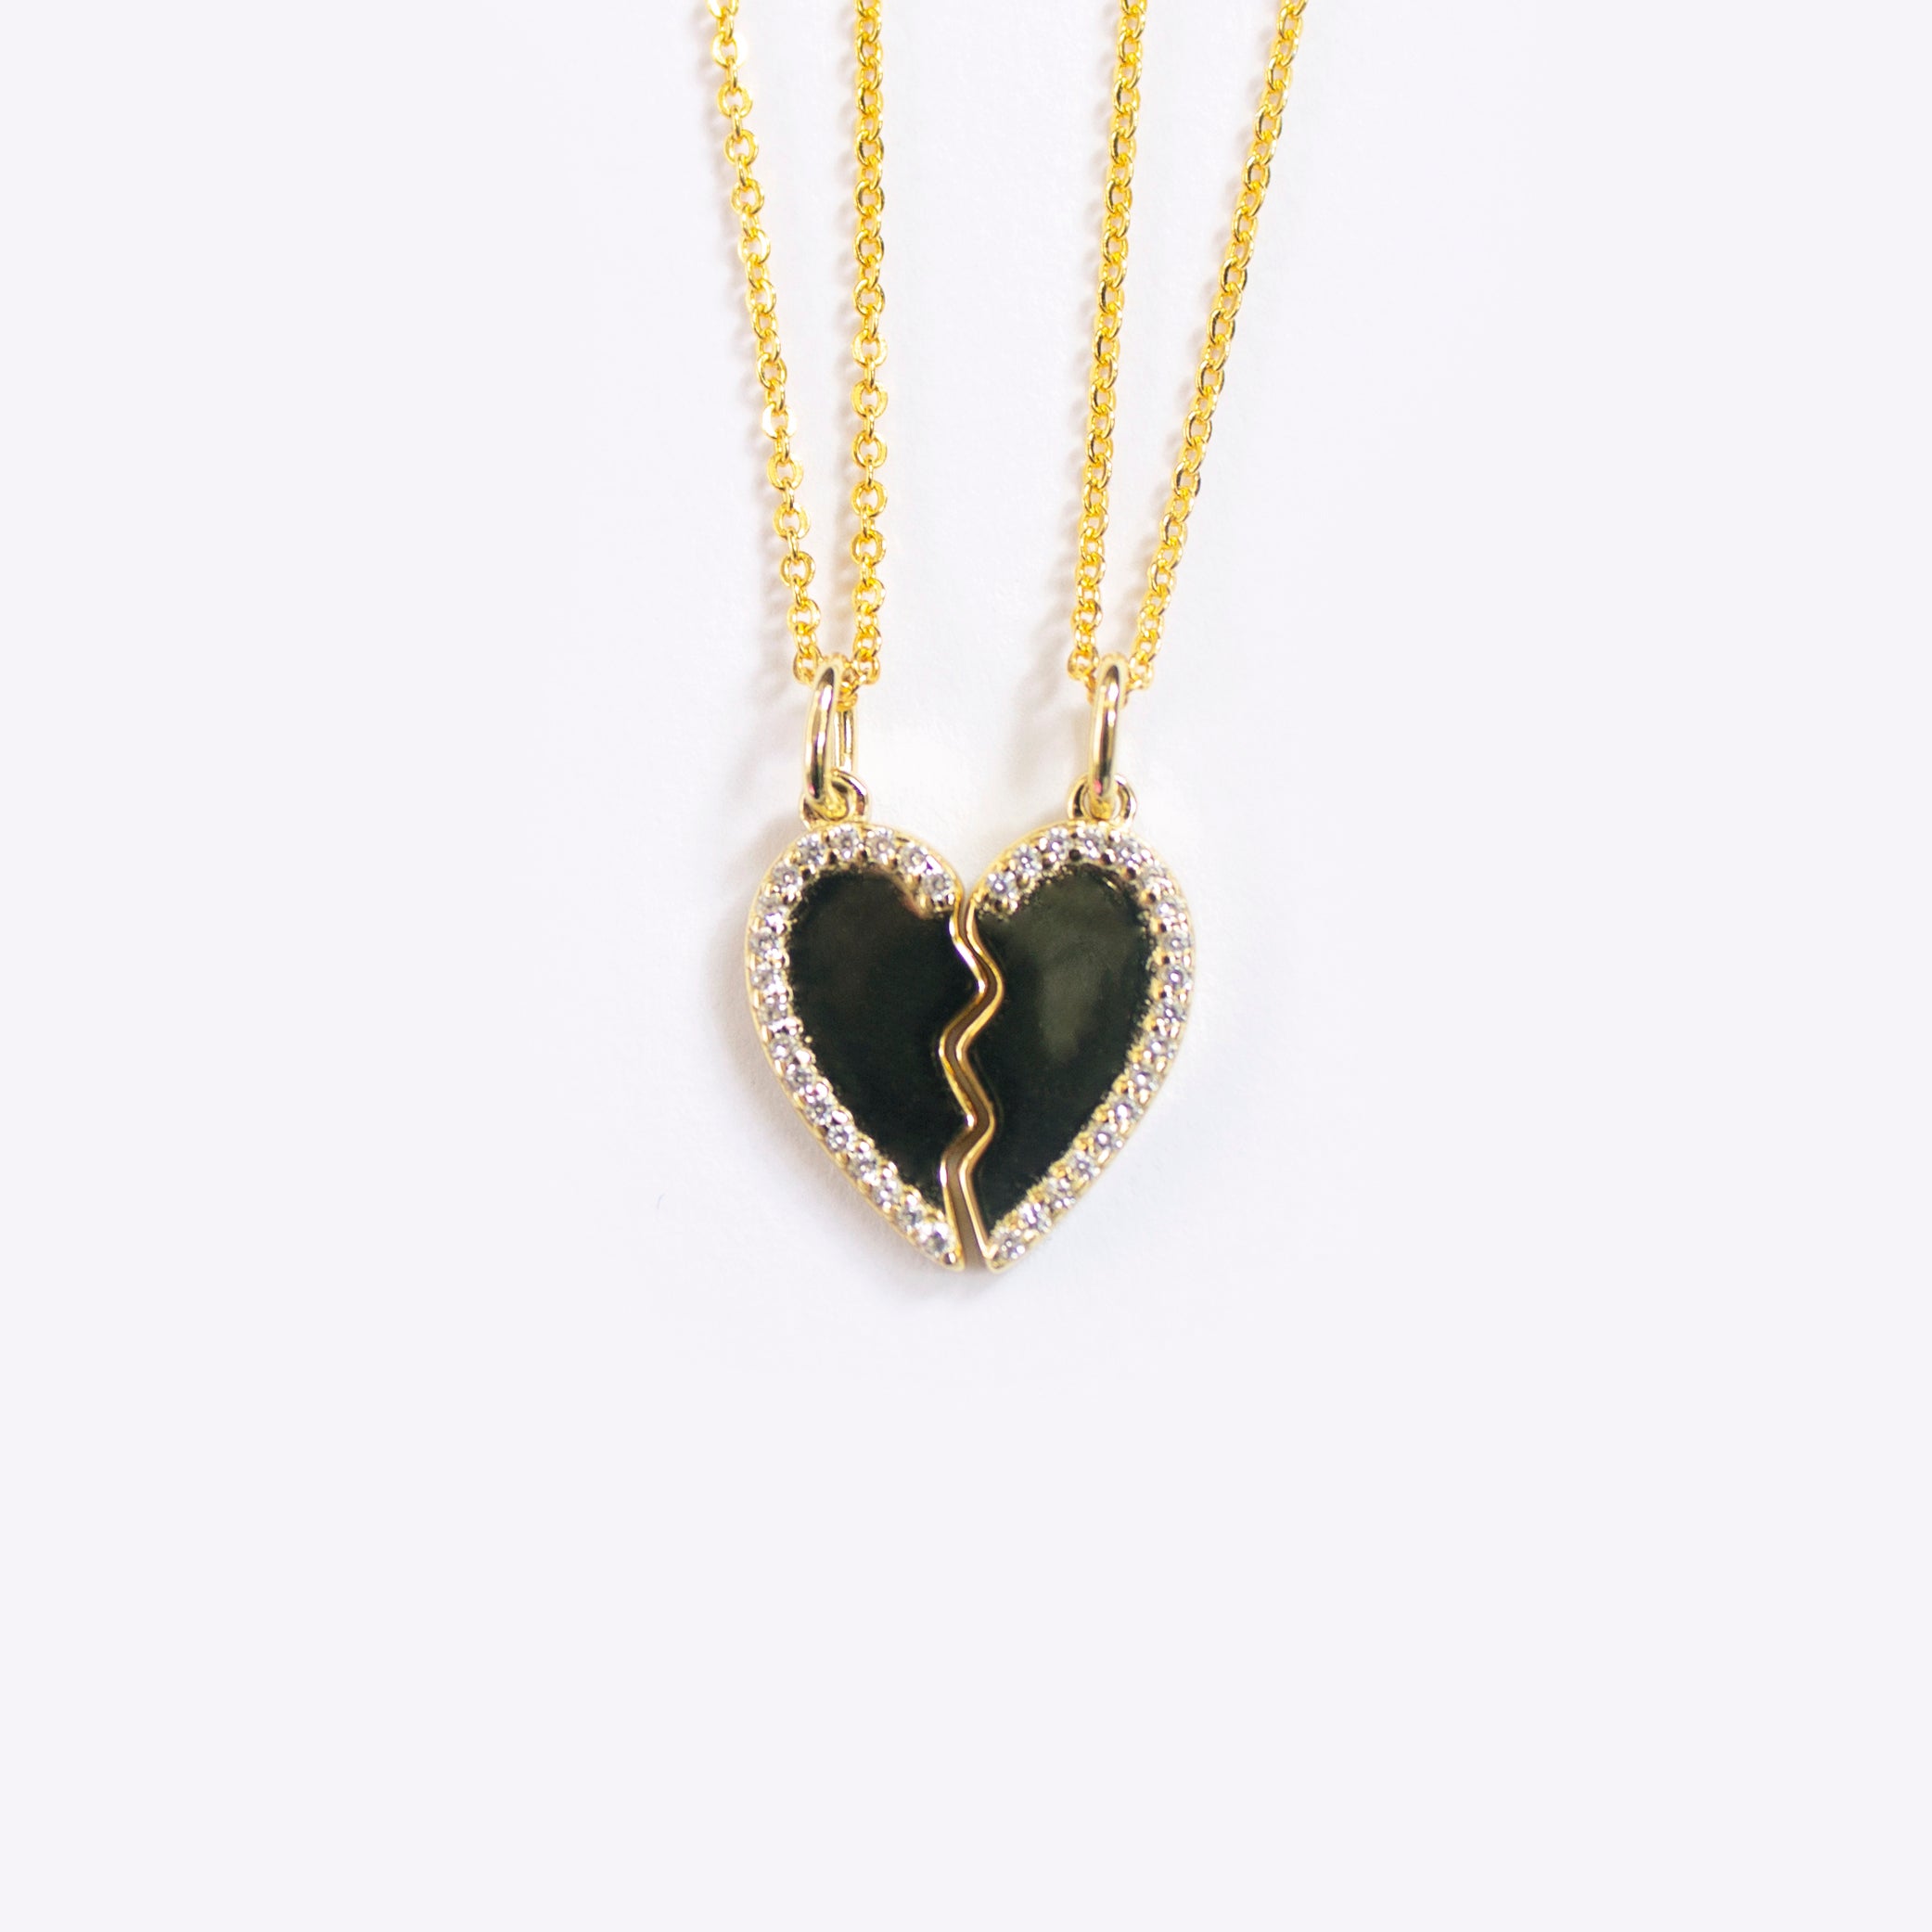 Better Together | BFF Necklaces